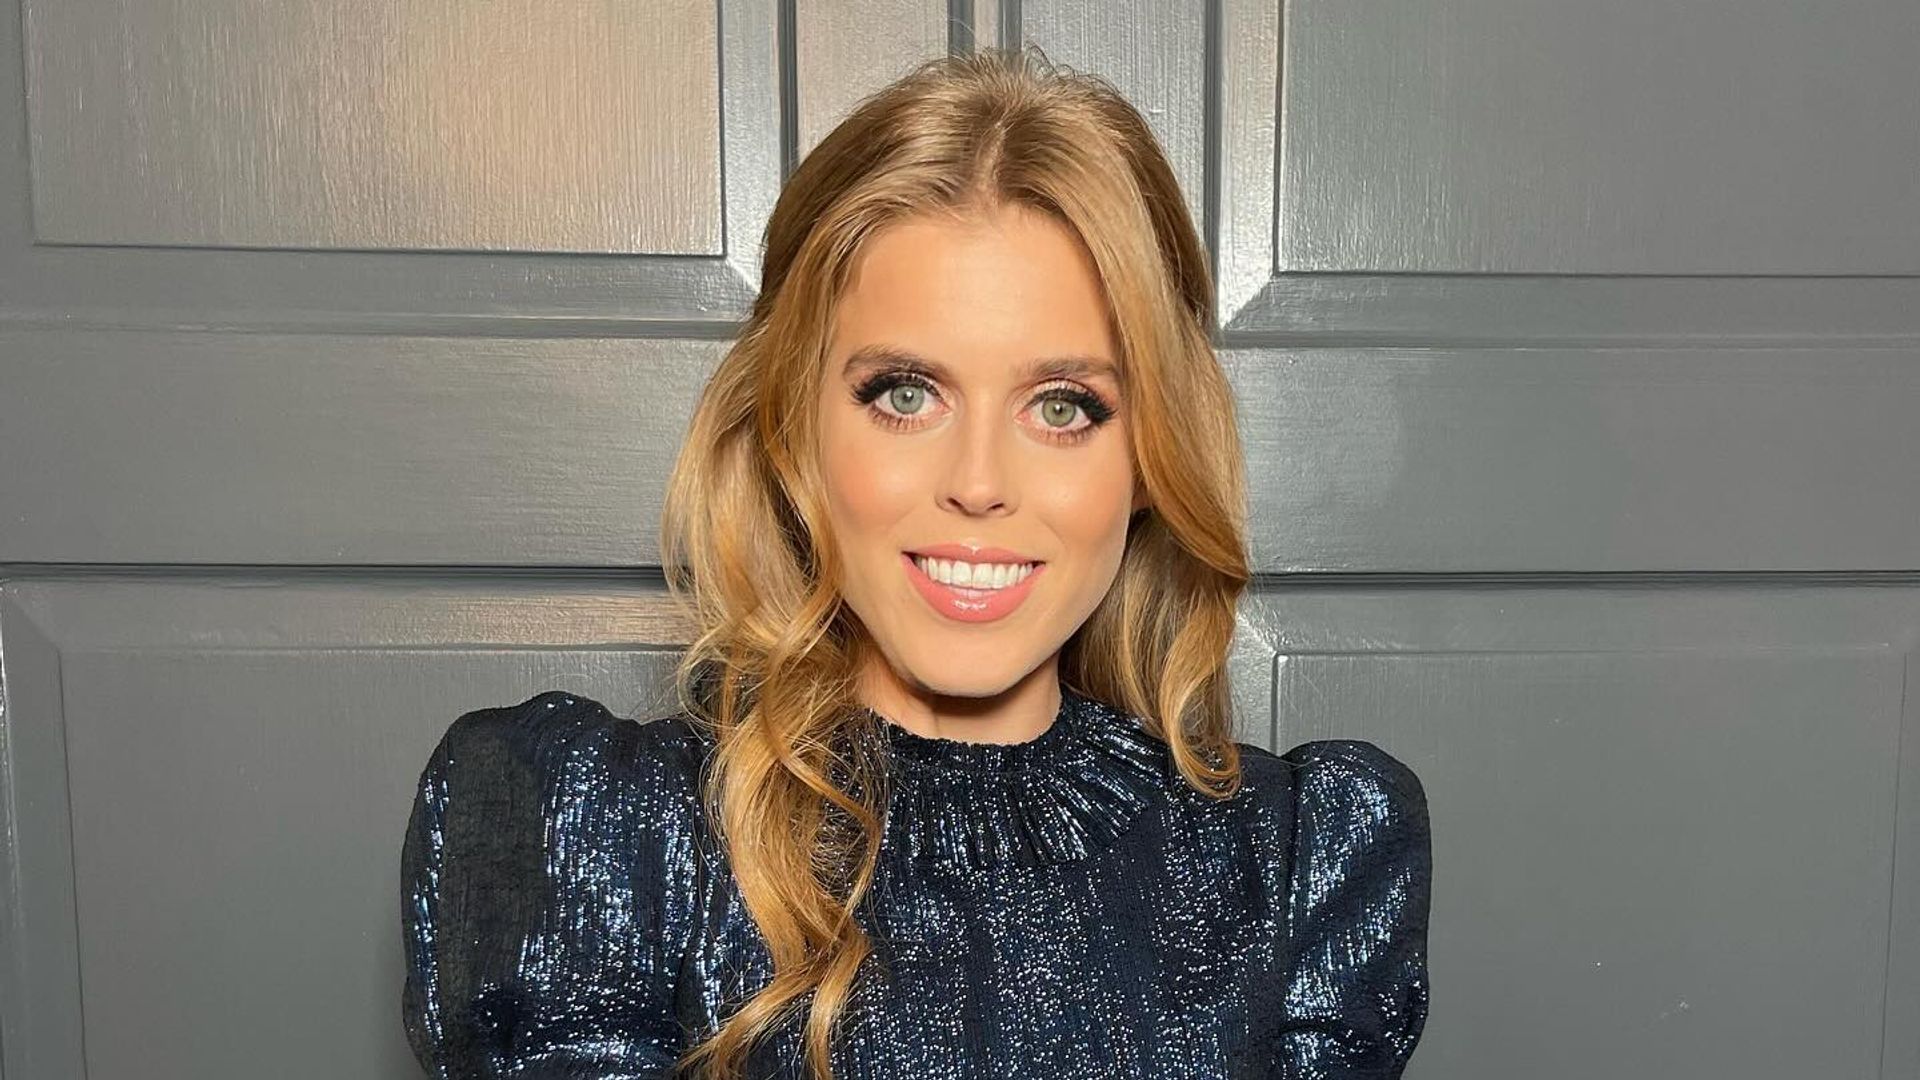 Princess Beatrice looked breathtaking for a glamorous event in New York